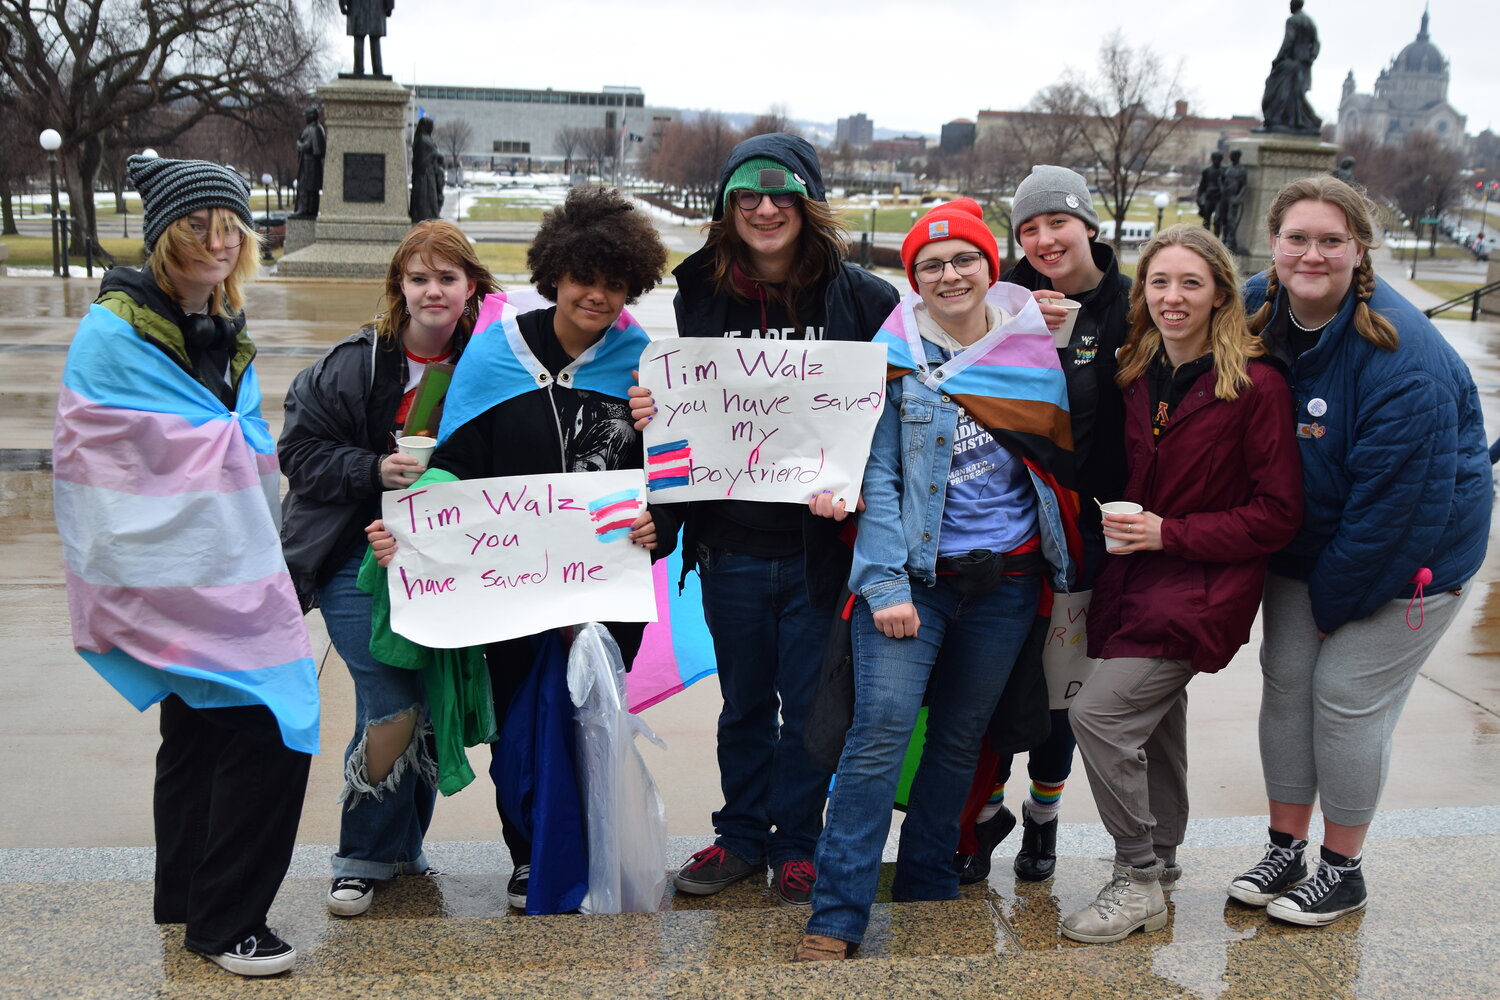 (Left to right) Meg Bexell, Eden Urban, Ace Austin, Jack Bexell, Savannah Berg, Elizabeth Dimock, Katie Dimock and Samantha Pollack attend the march for trans rights outside the Minnesota Capitol on March 31, 2023.